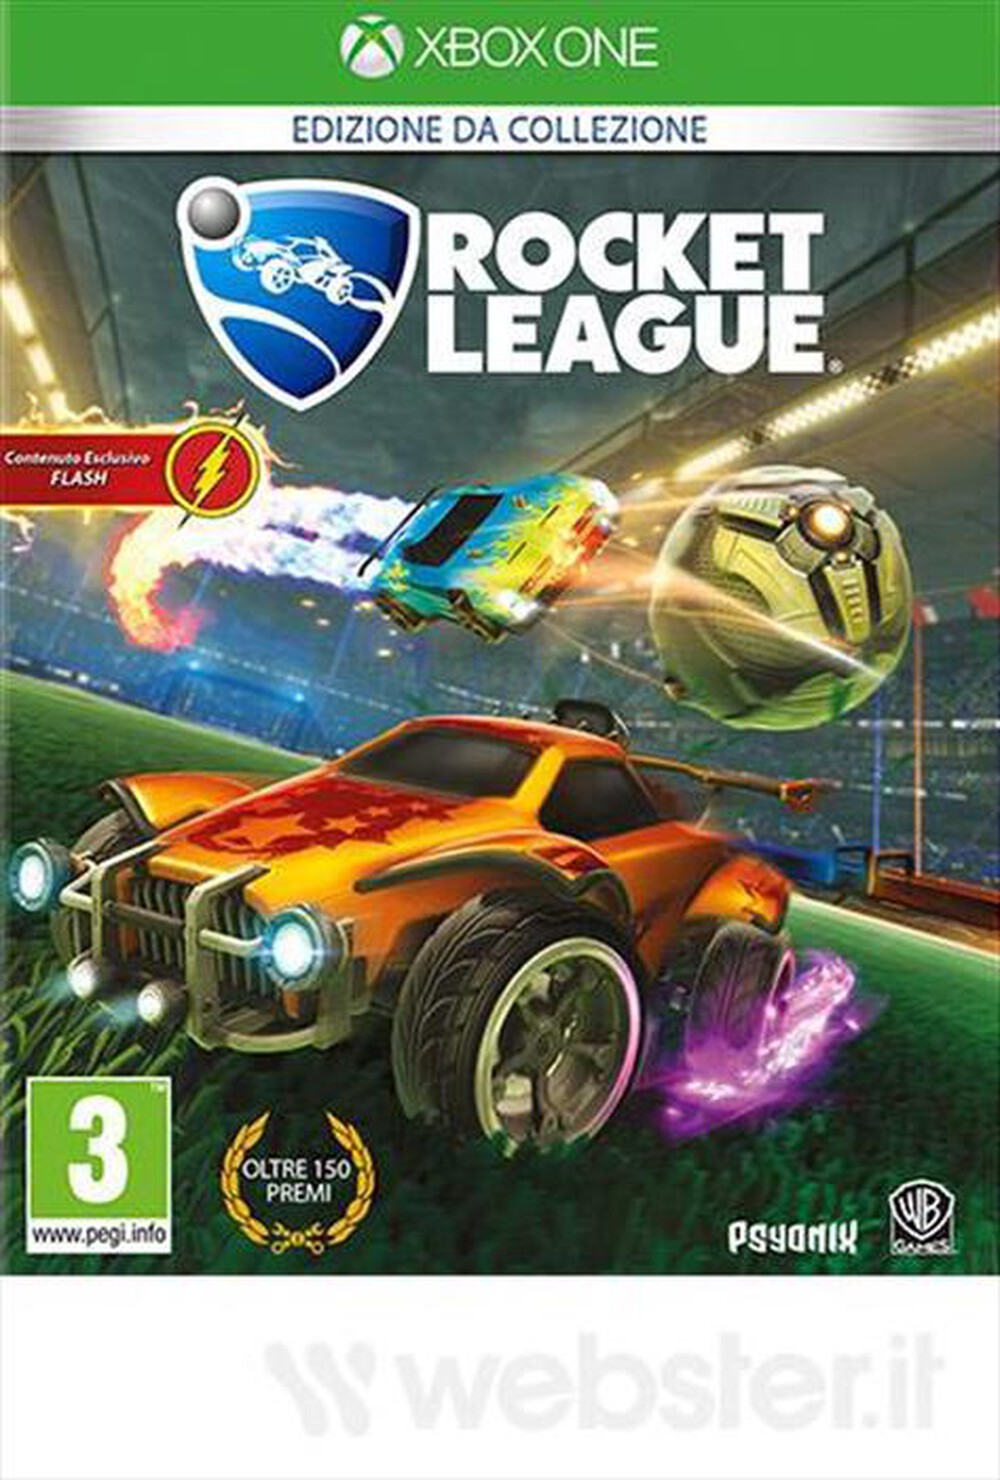 "WARNER GAMES - Rocket League: Collector's Edition Xbox One - "